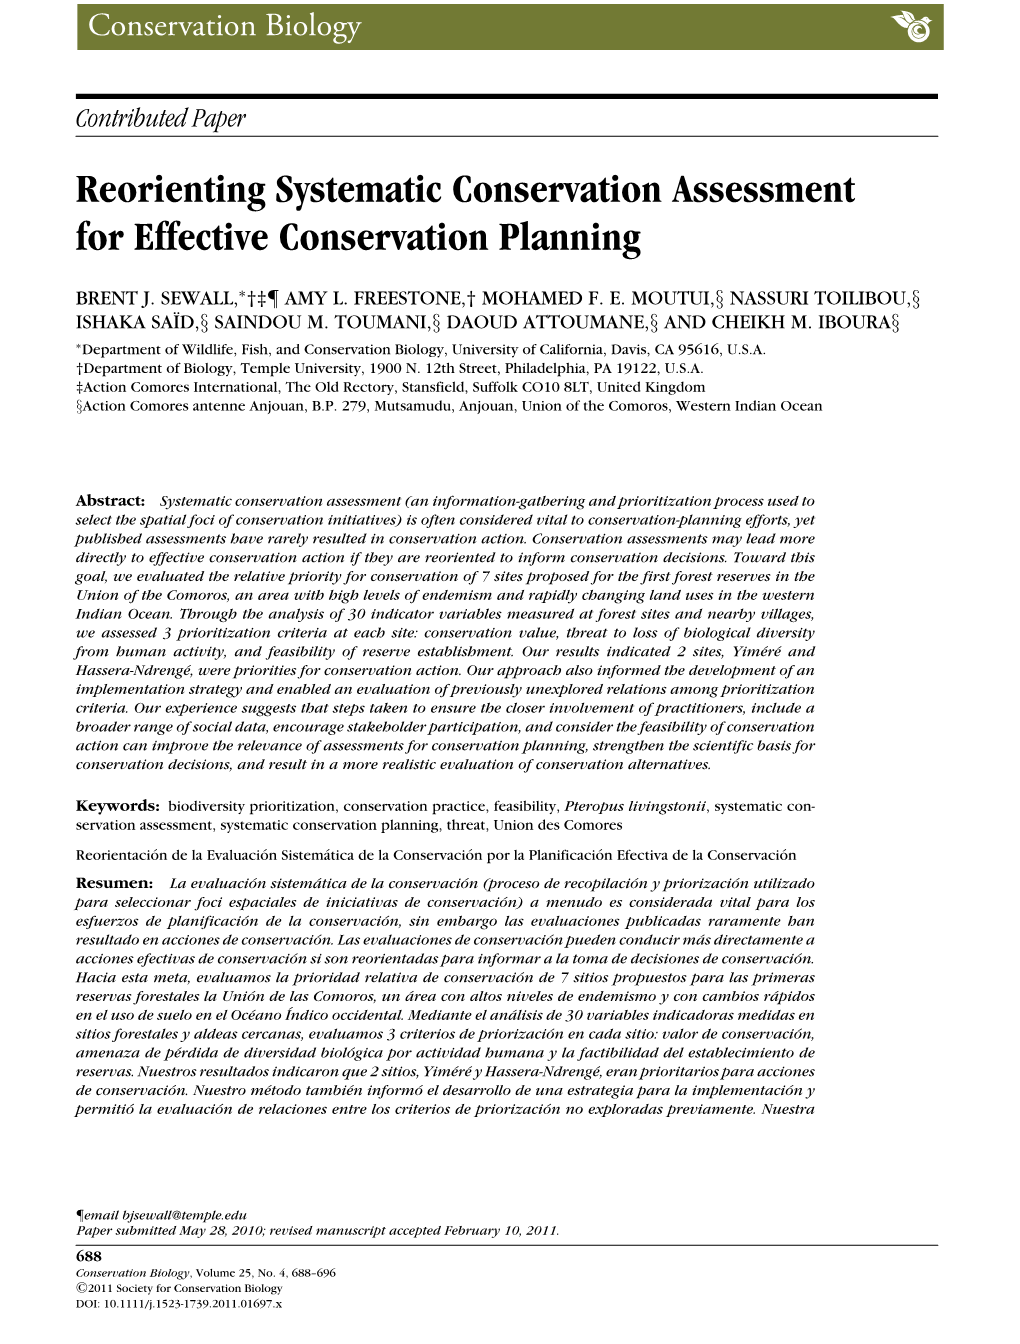 Reorienting Systematic Conservation Assessment for Effective Conservation Planning